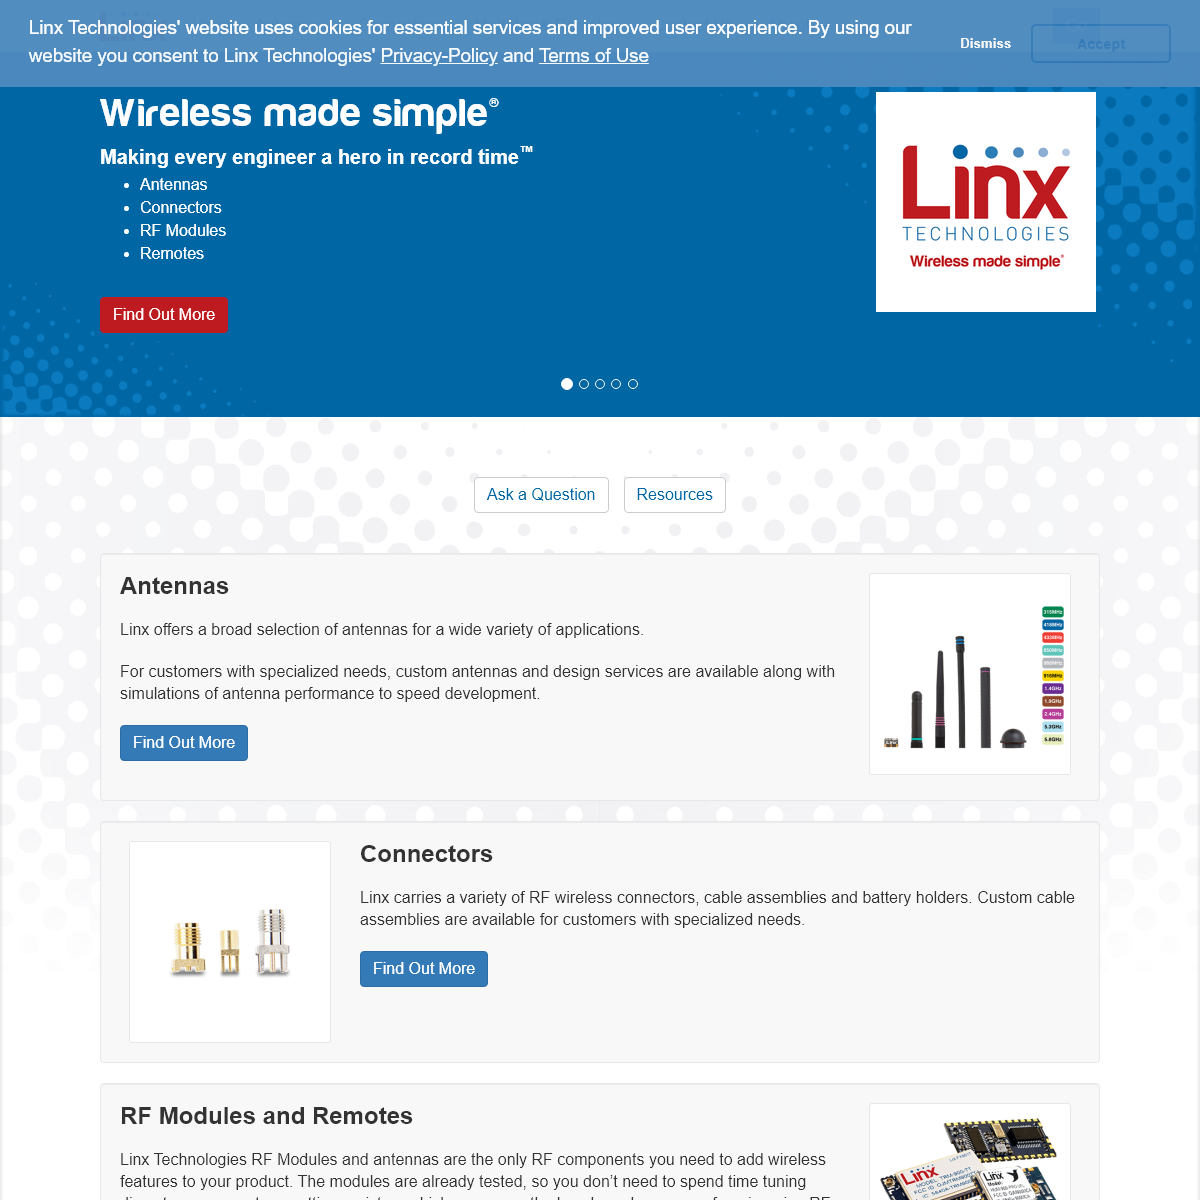 A complete backup of linxtechnologies.com